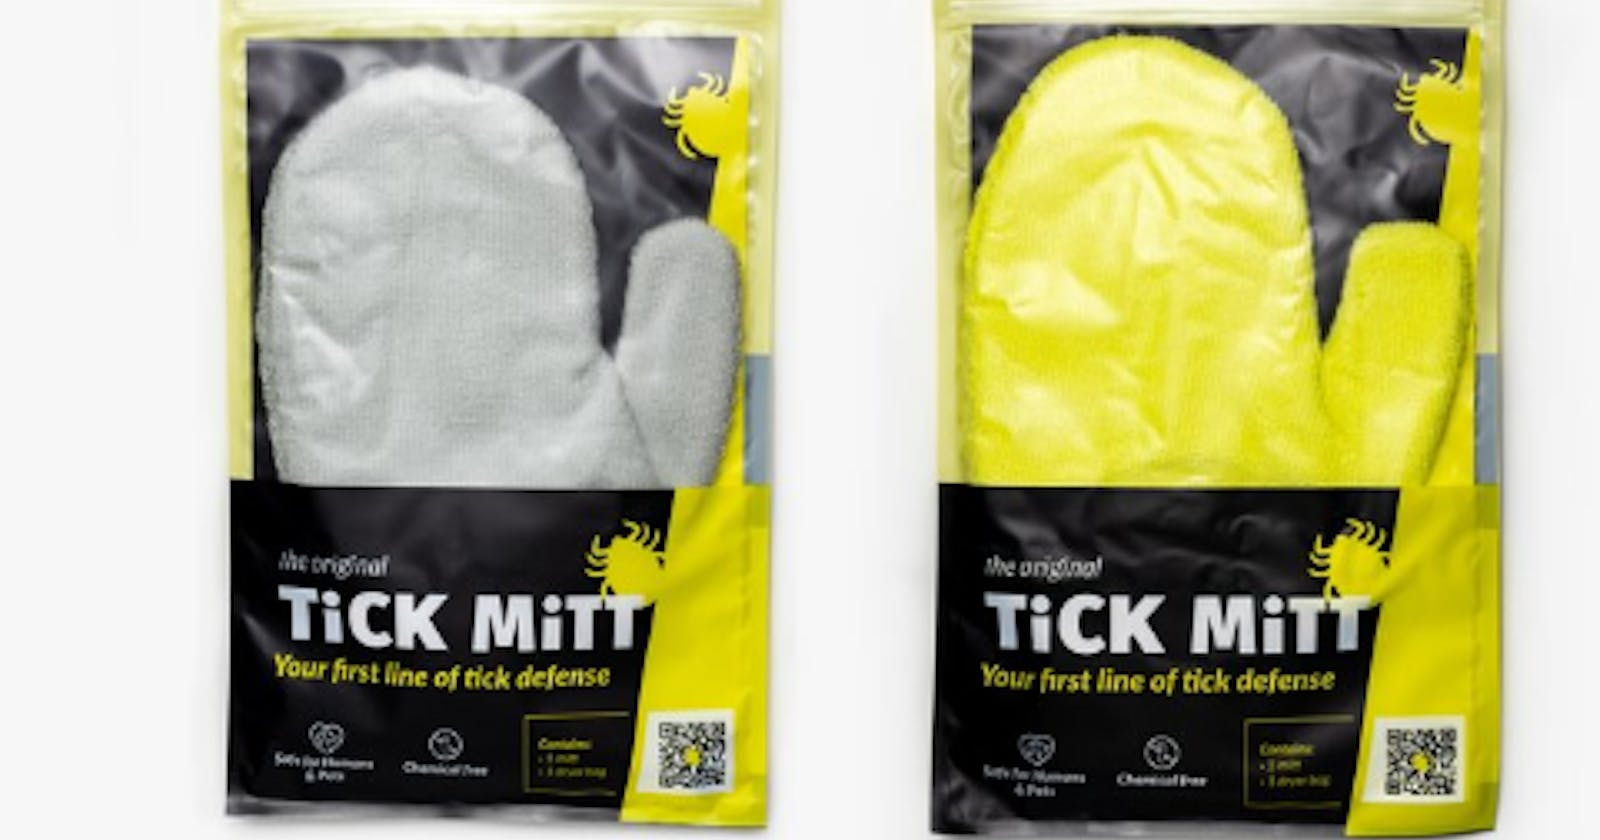 Tick Mitt Reviews: Must Read This Before Buying?